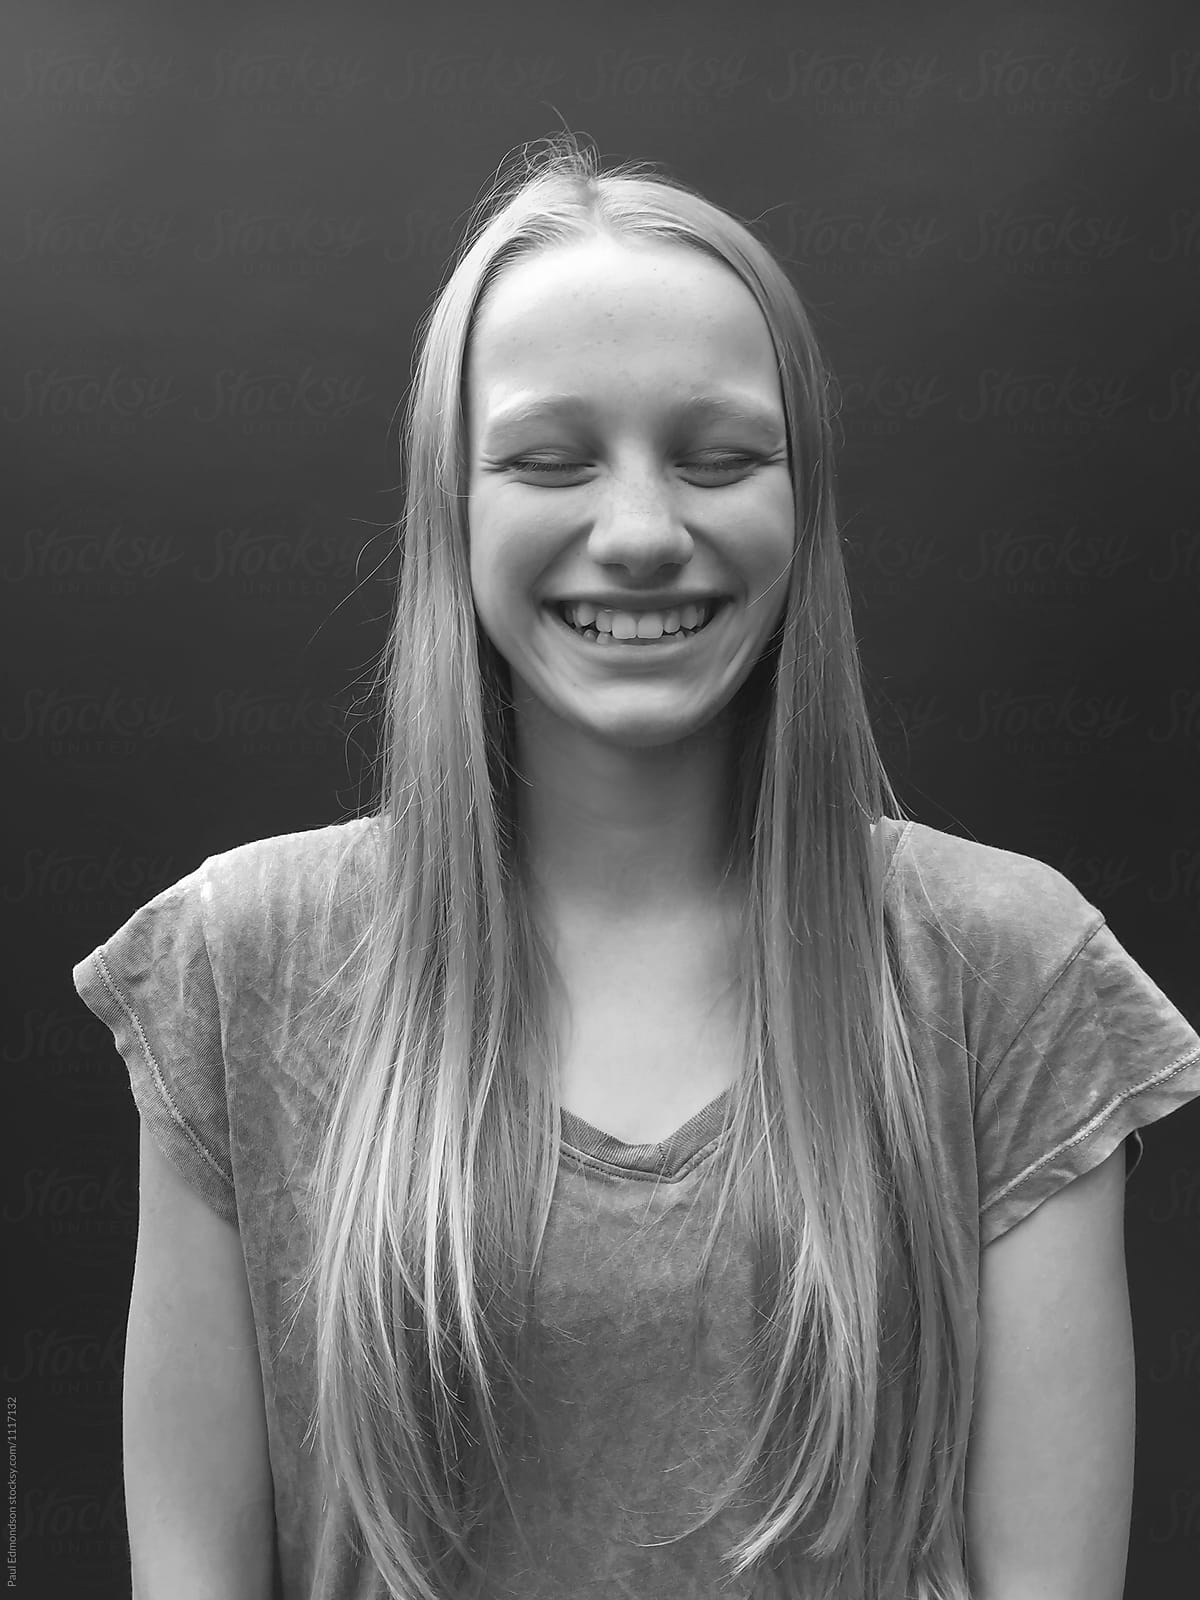 Portrait Of Teenage Girl Laughing Eyes Closed By Rialto Images